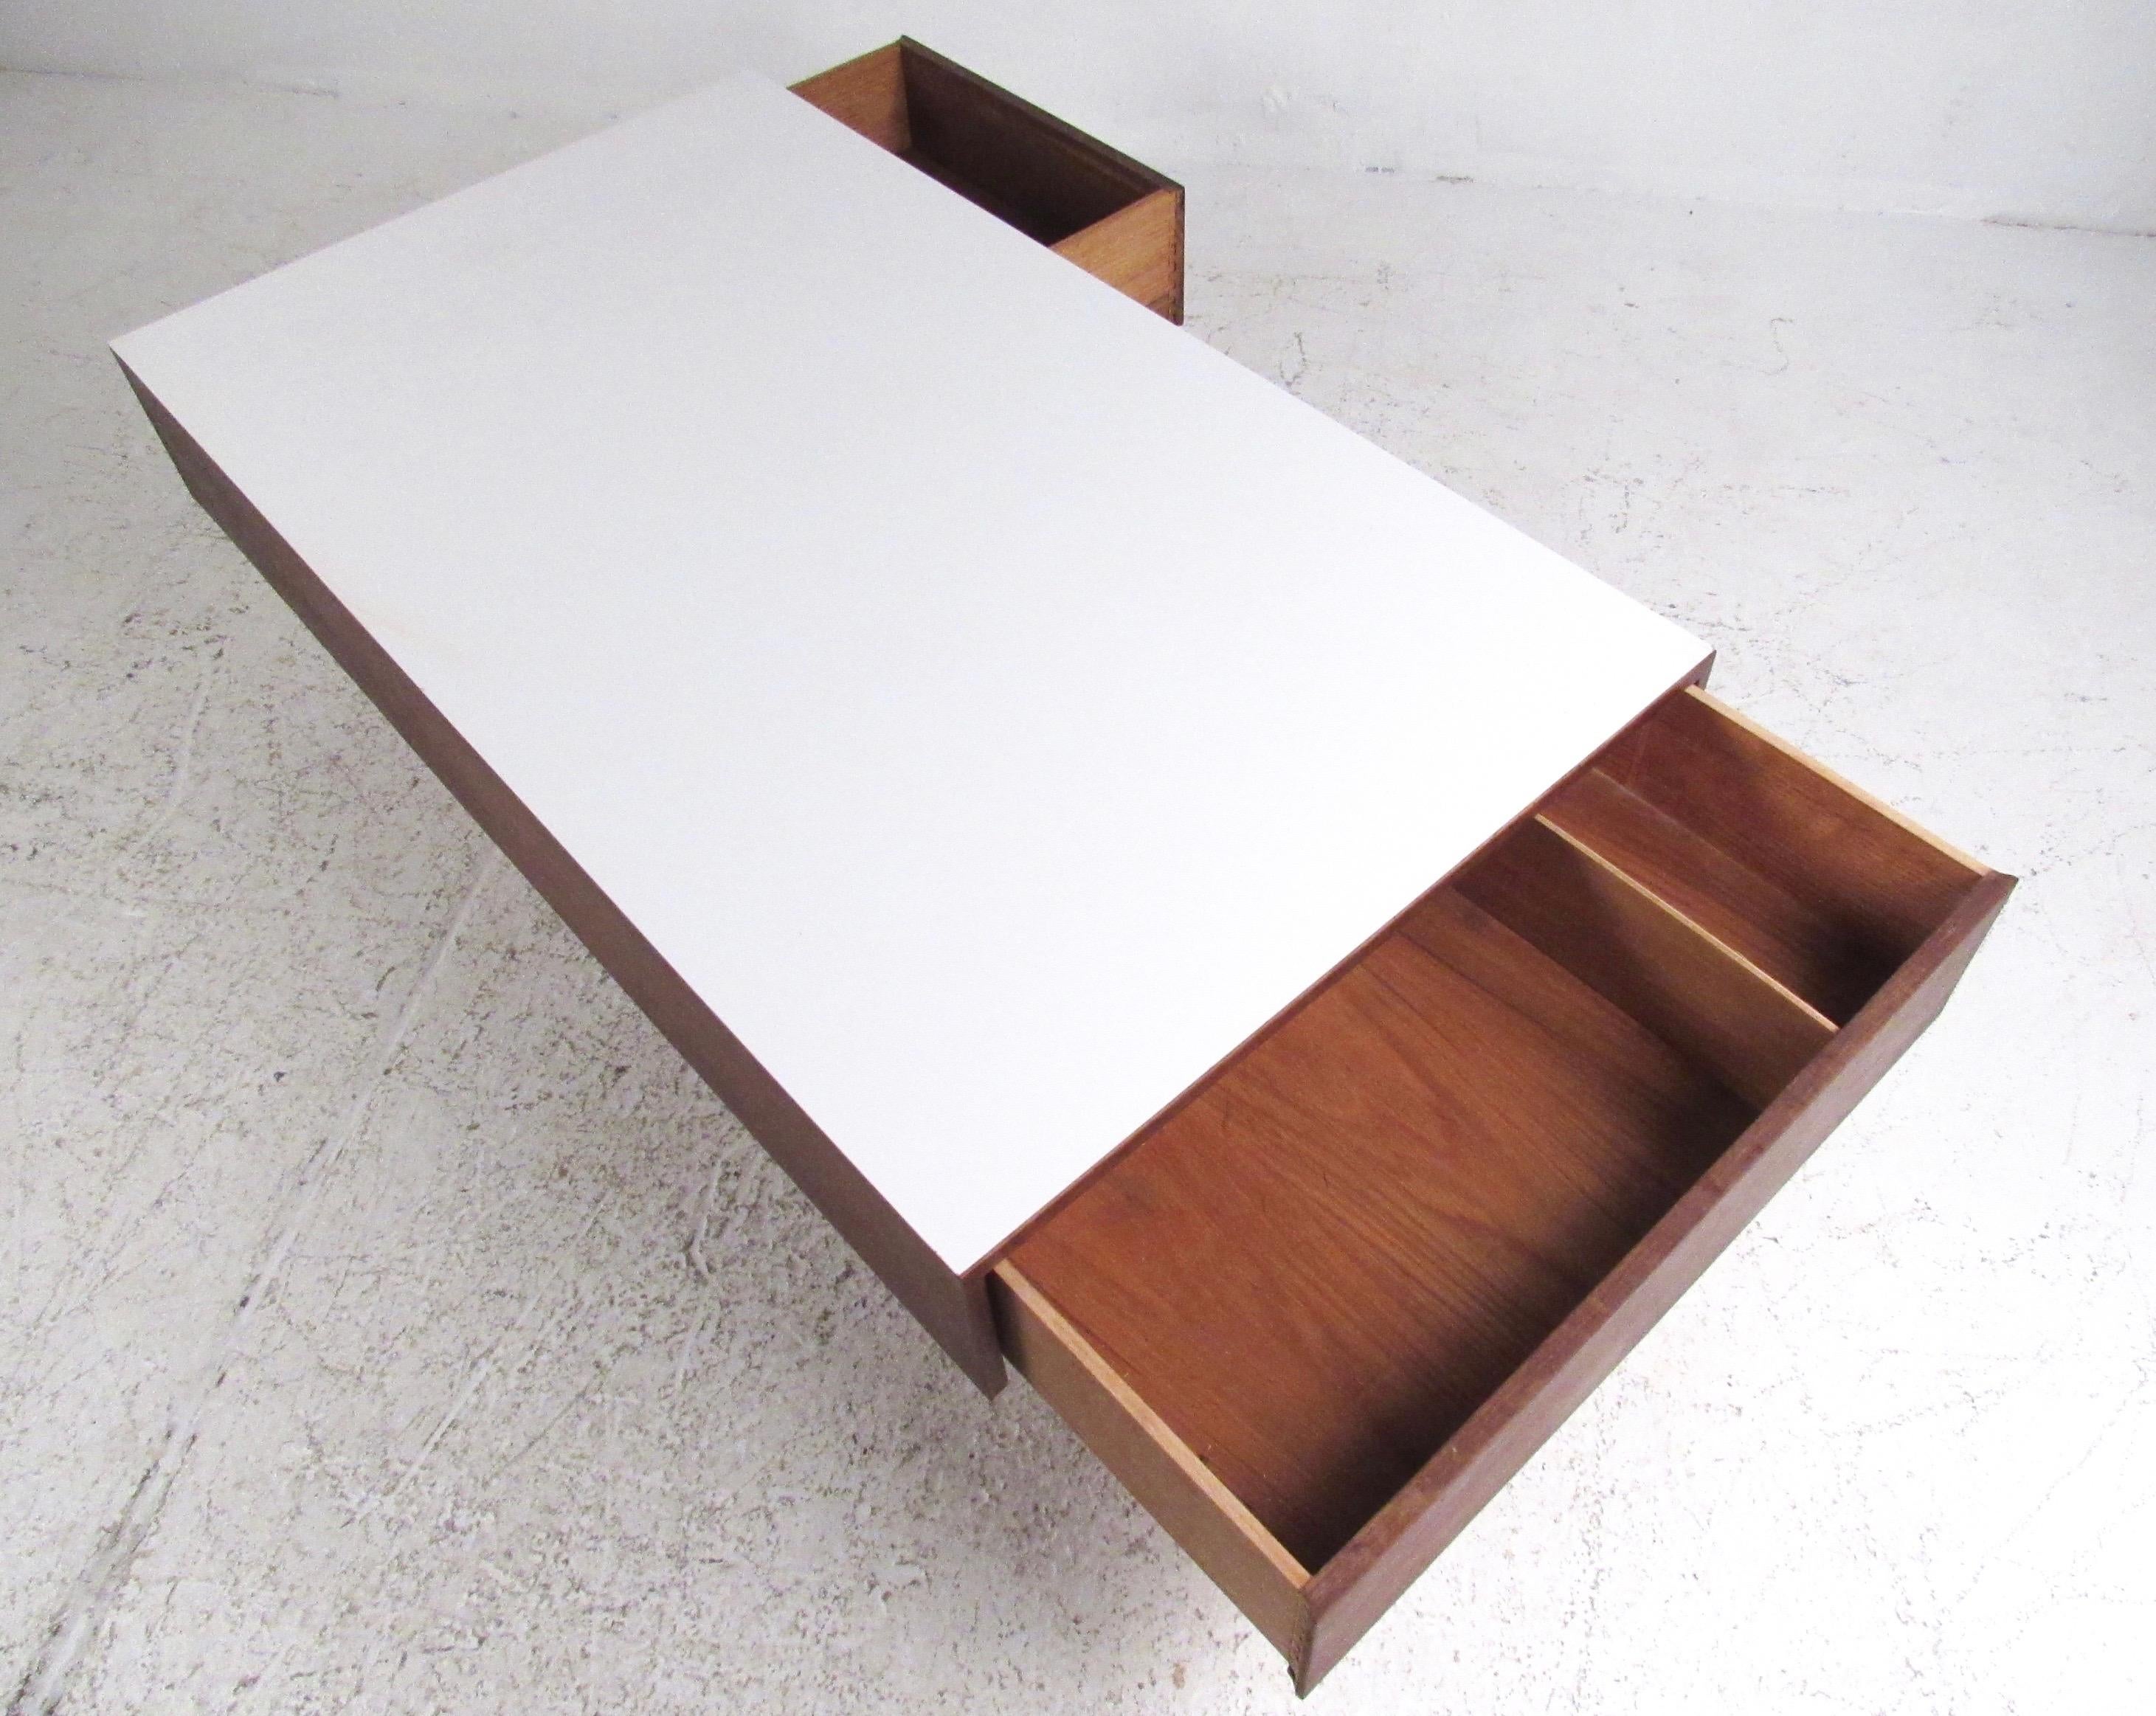 This large Mid-Century Modern walnut coffee table features tapered legs, two storage drawers, and a white formica top. The unique vintage appeal of this storage friendly coffee table adds retro charm as a center coffee table for home or business